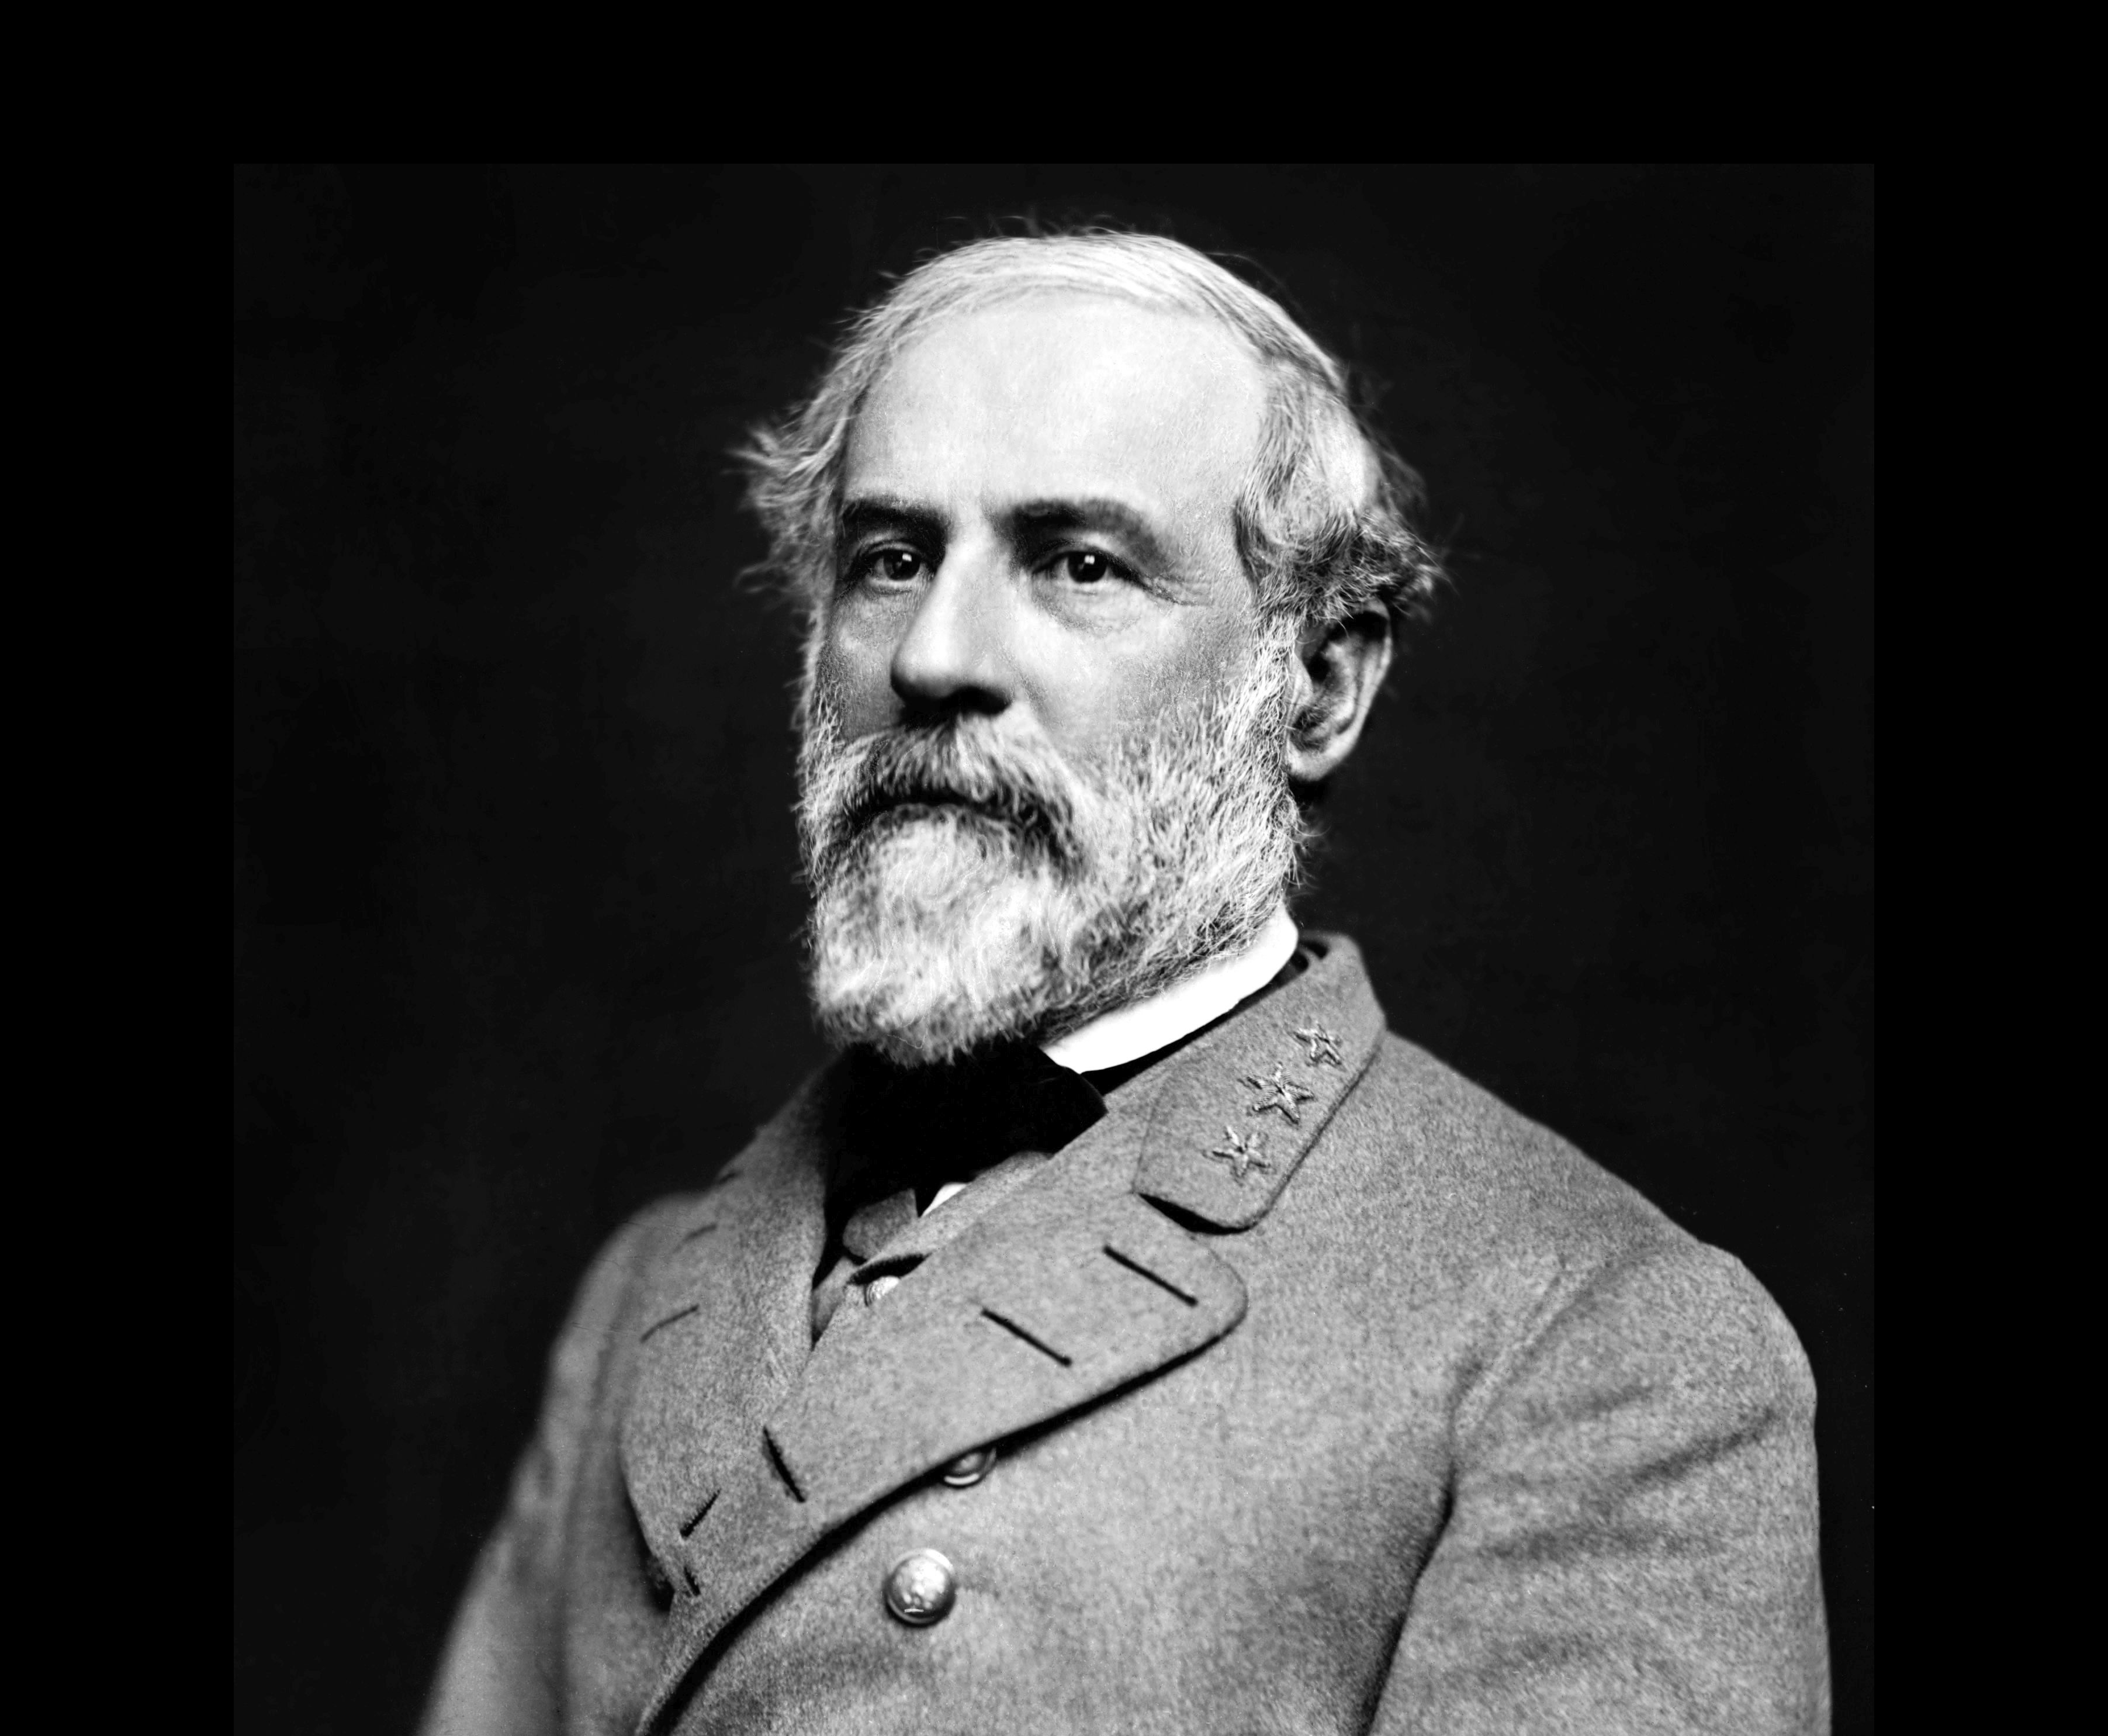 1865: Robert E. Lee Promoted to General-in-Chief of Confederate Forces